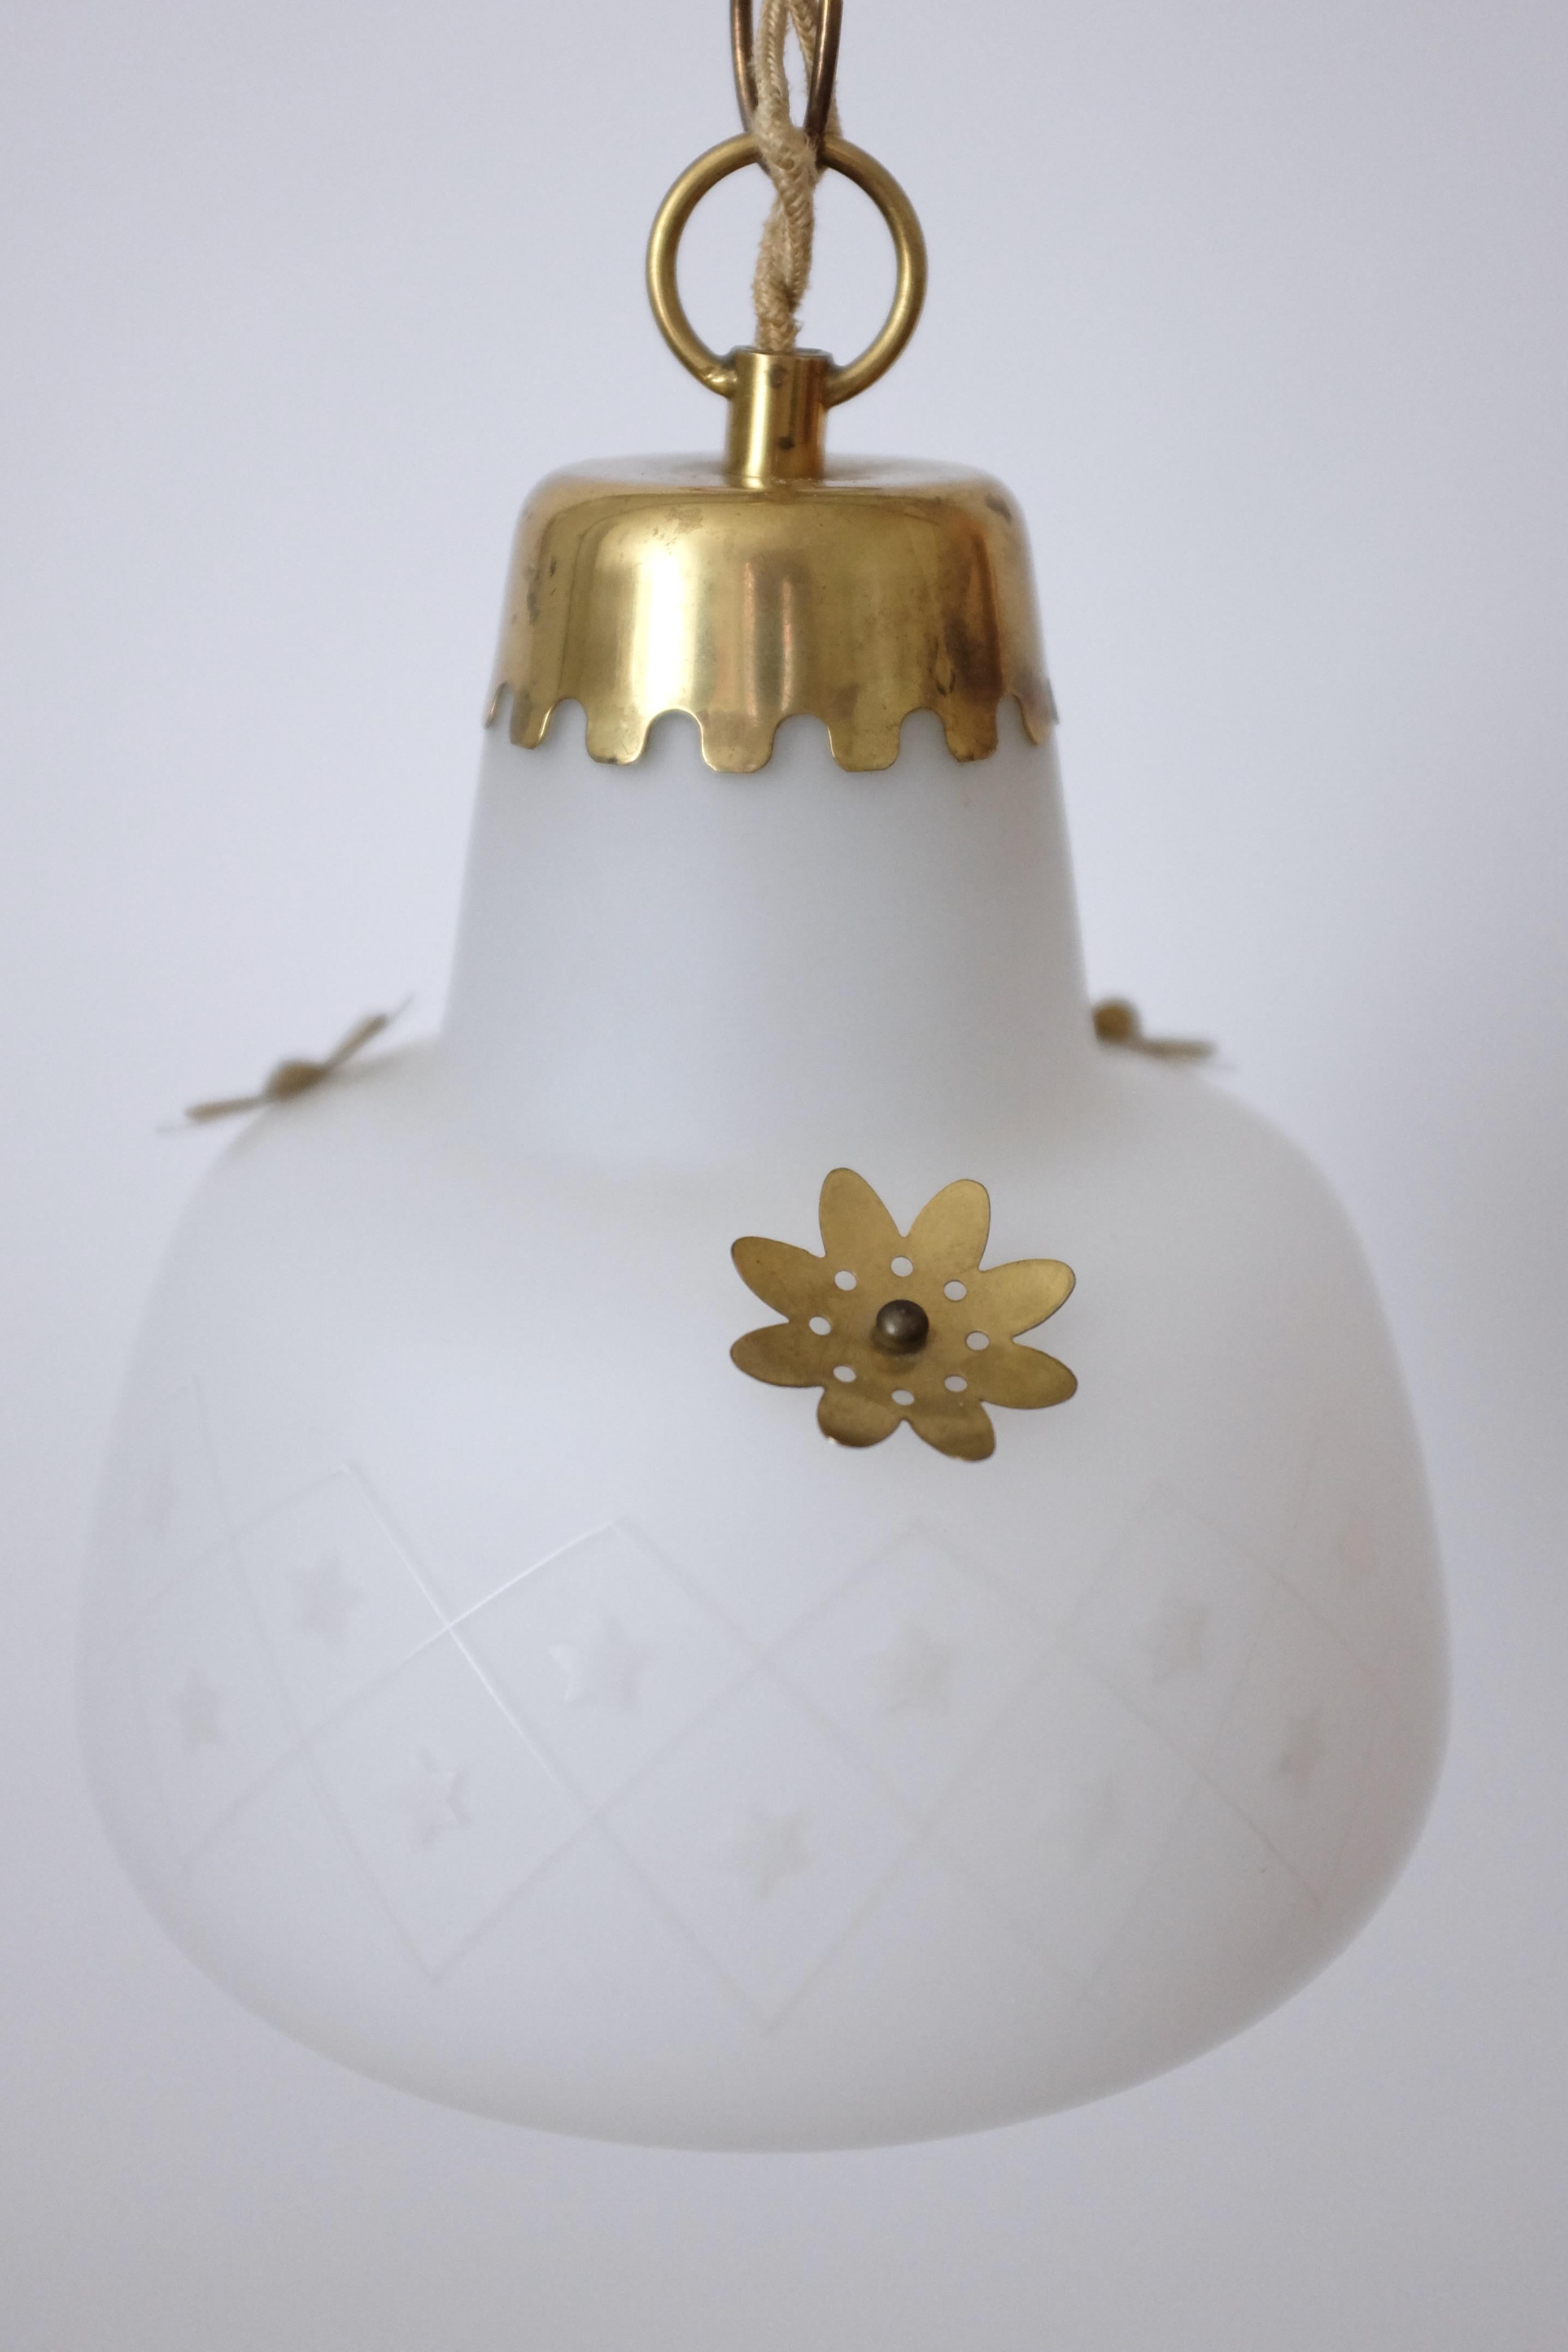 Charming Vintage 1950s brass and opaline glass pendant from Sweden. Engraved milky colored glas with decorative organic shaped brass details. The glass has a wavy details around the bottom of the lantern with some small chips without impacting the